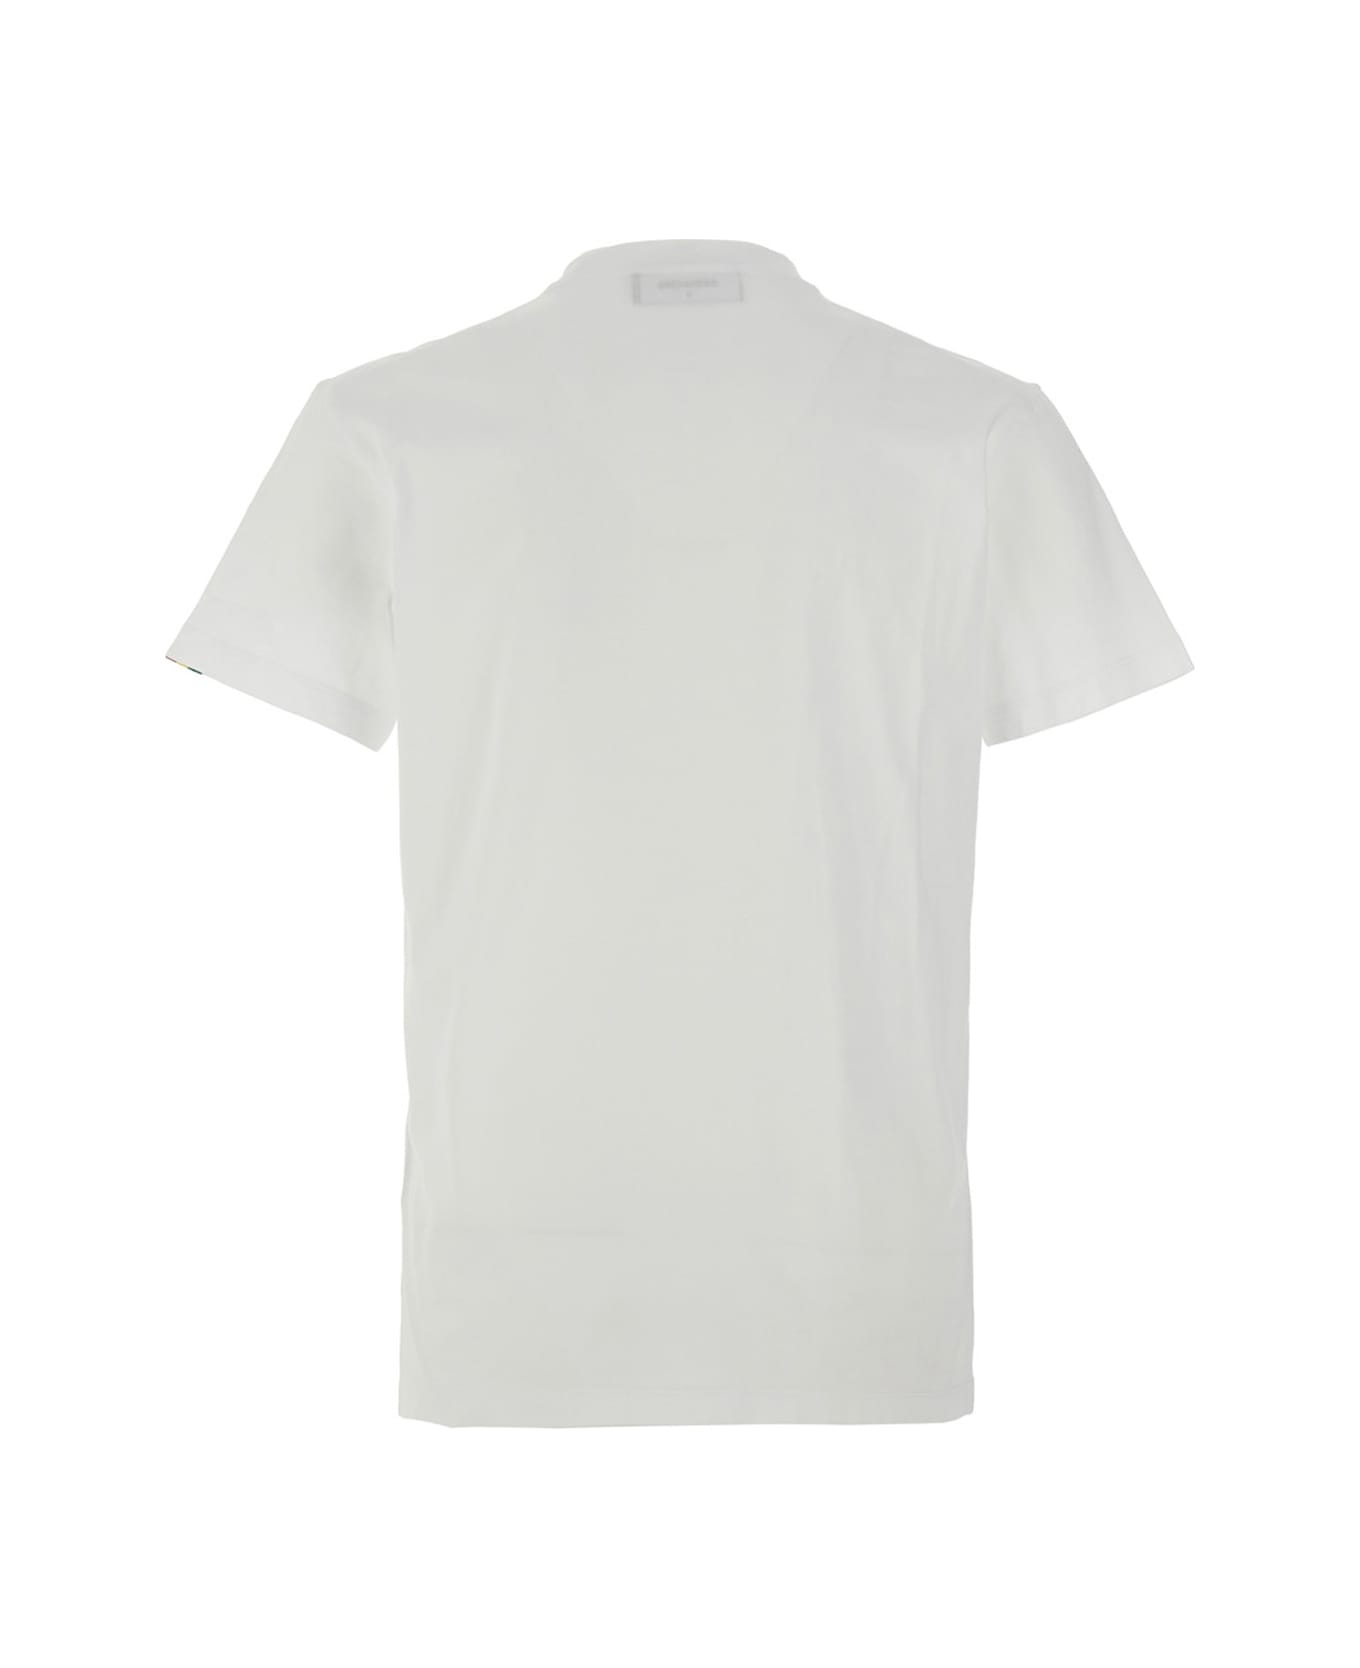 Dsquared2 T-shirt 'cool' - White